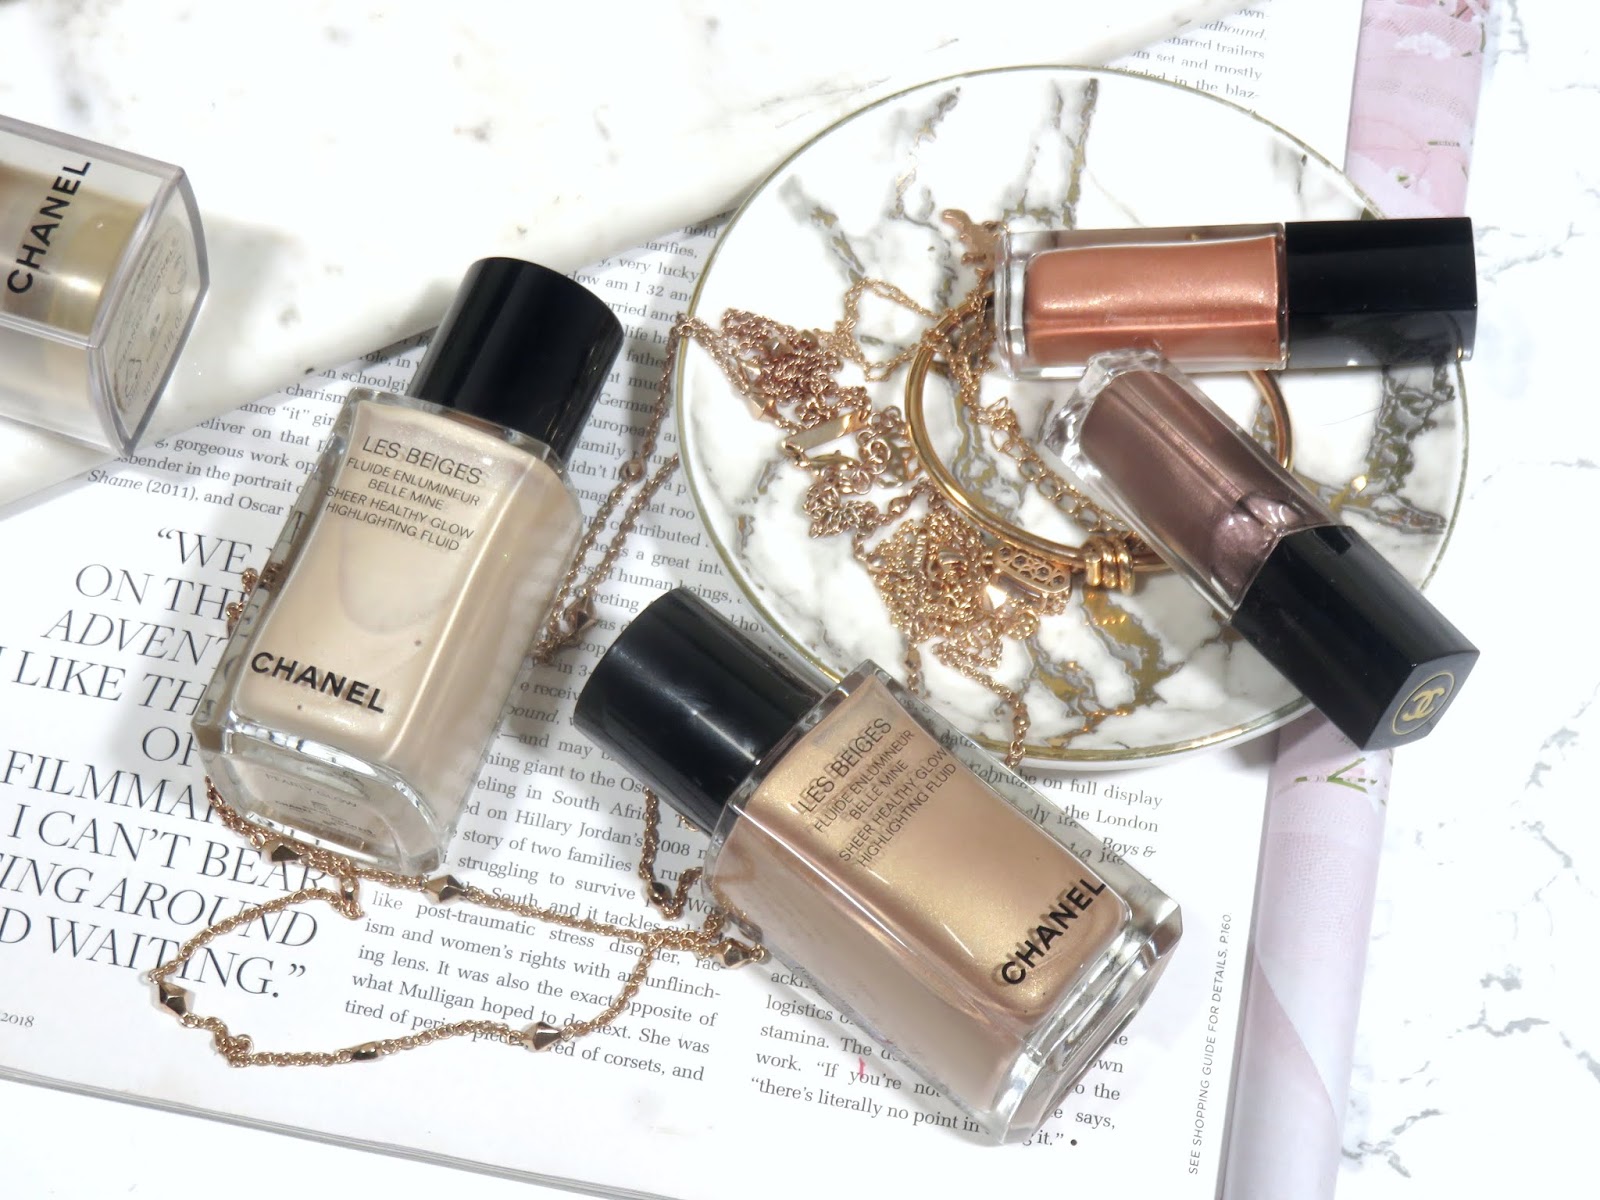 chanel les beiges highlighting fluid sunkissed